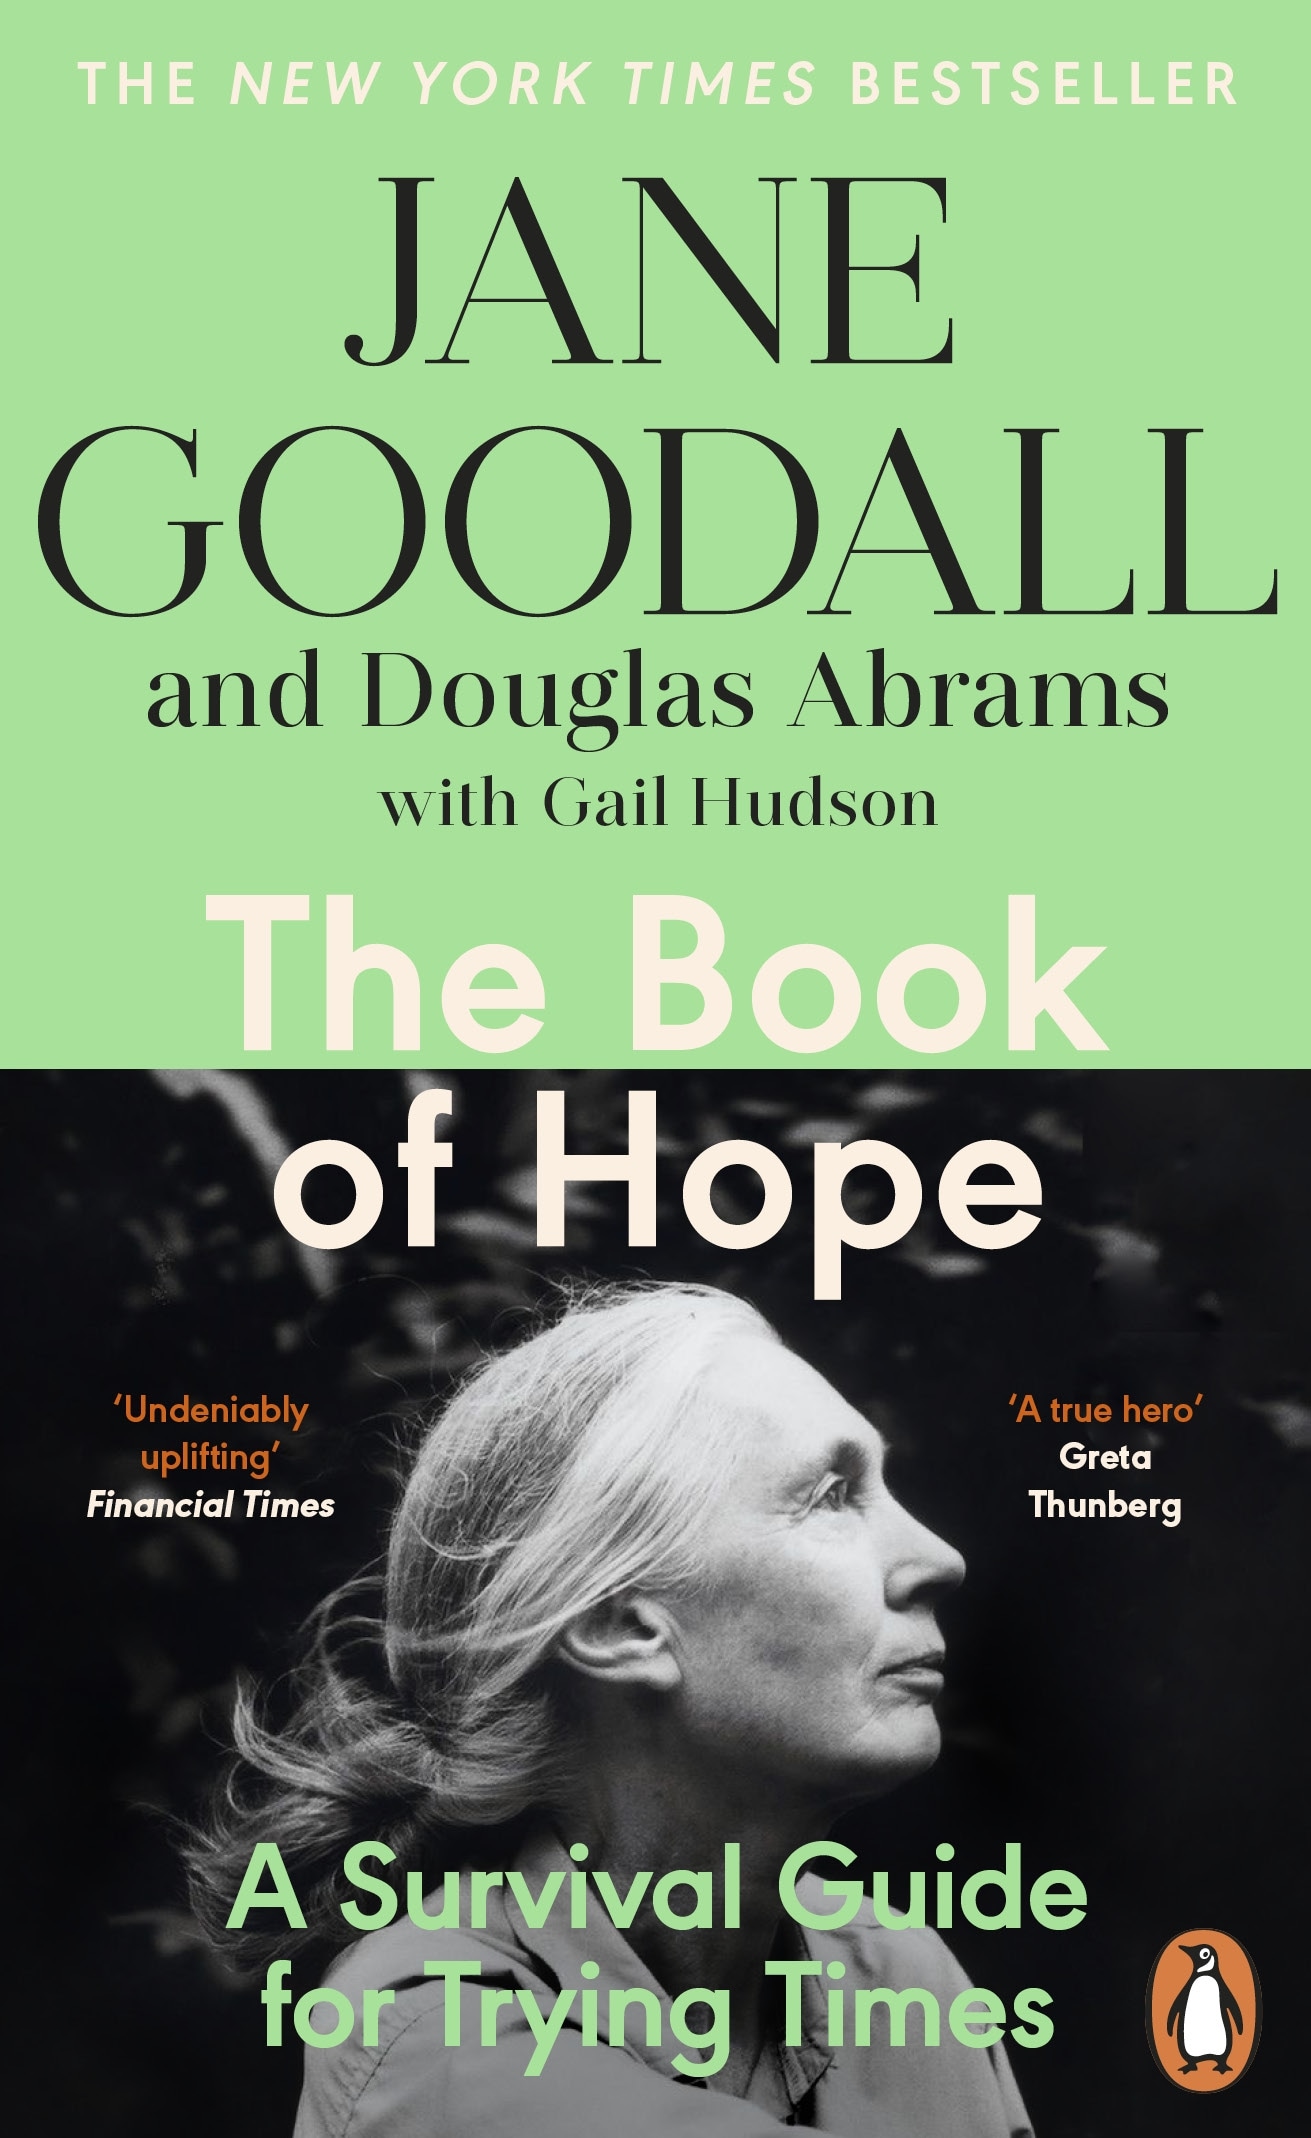 Book “The Book of Hope” by Jane Goodall, Douglas Abrams — July 28, 2022